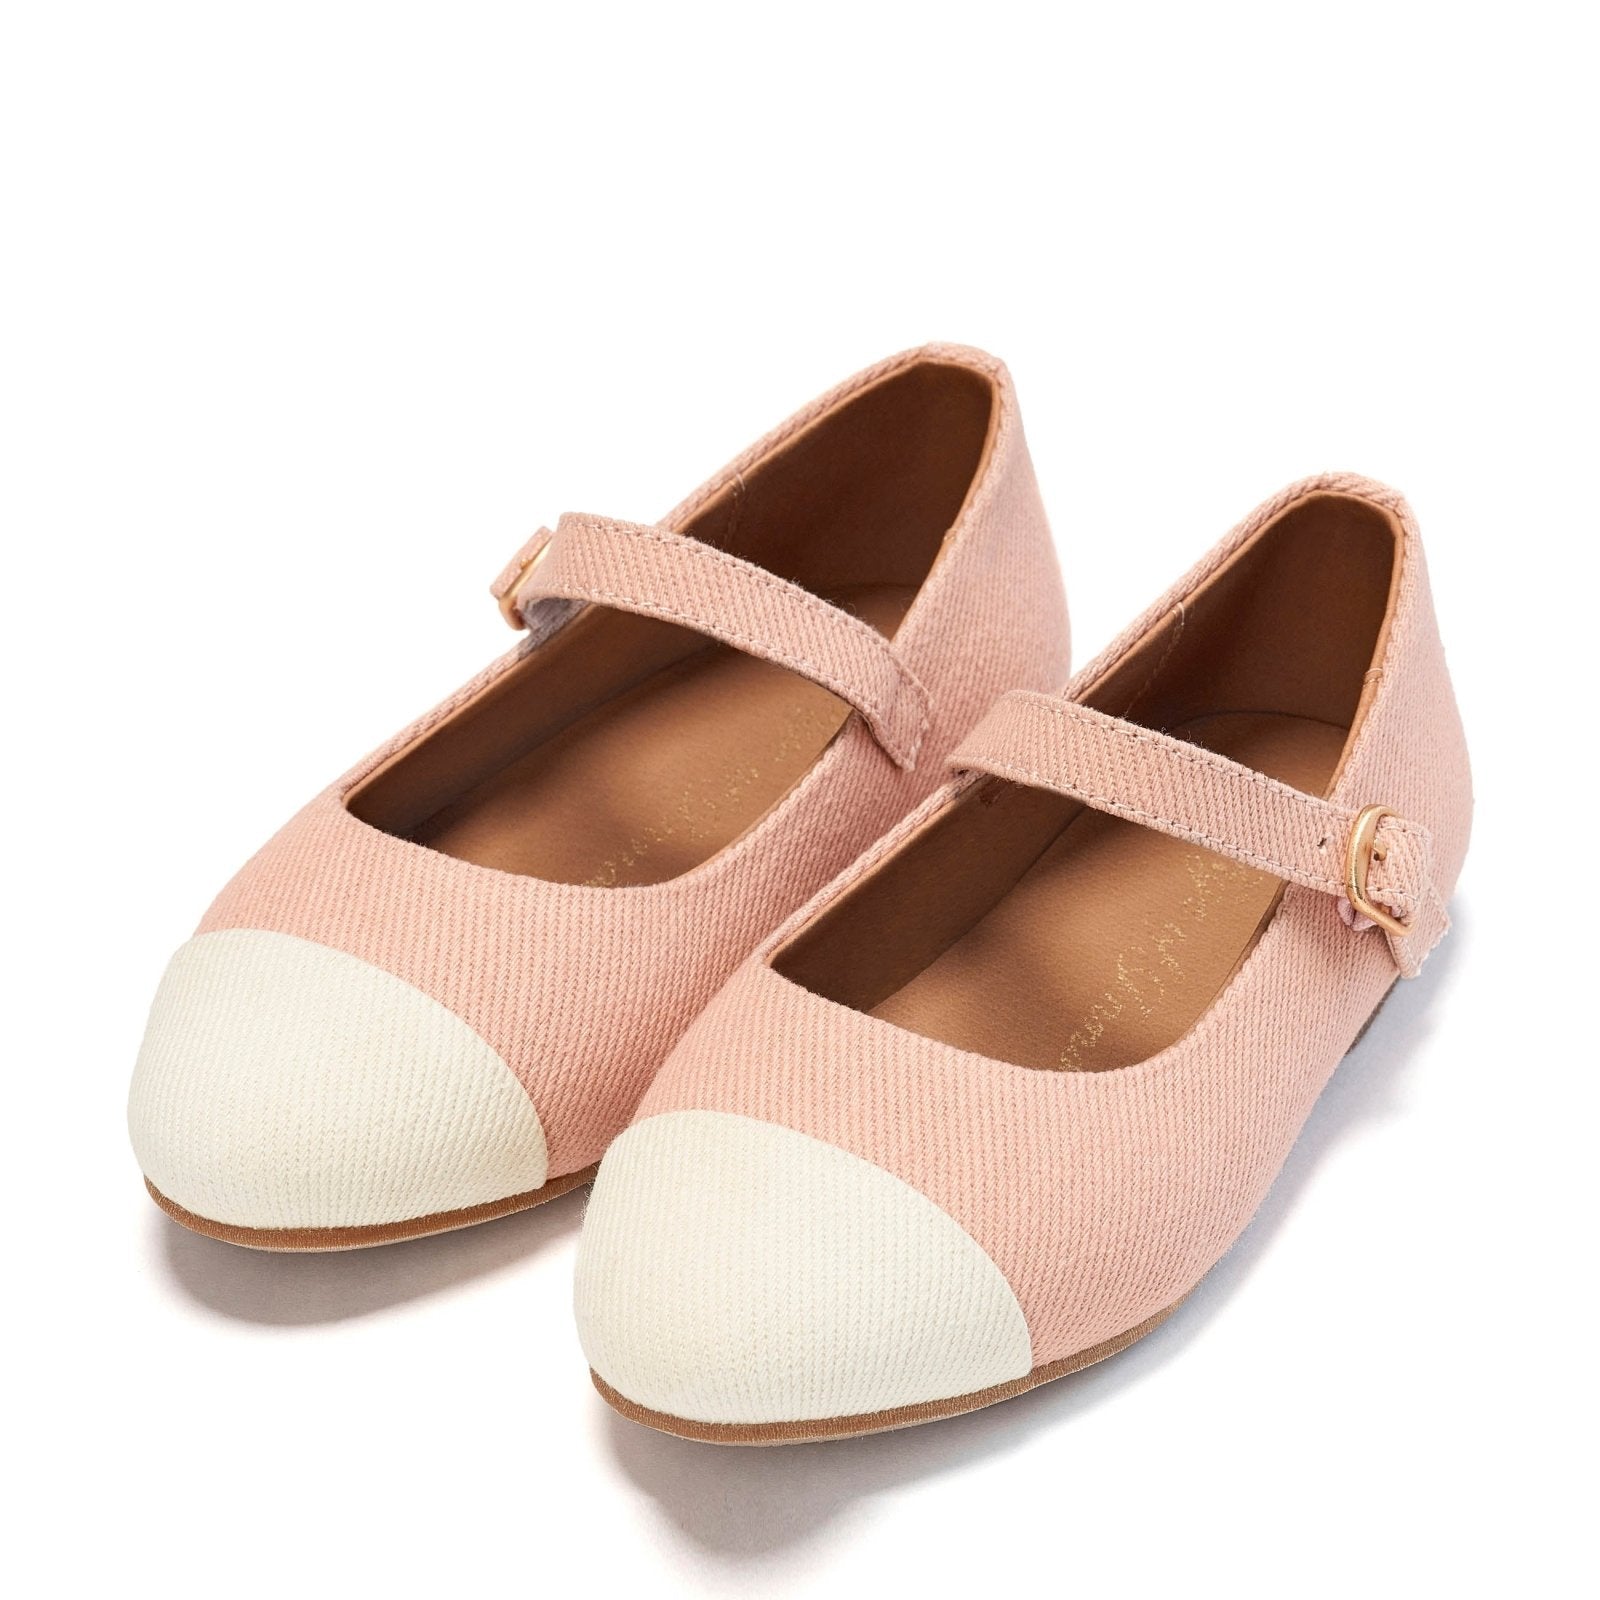 Bebe Canvas 2.0 Pink/White Shoes by Age of Innocence